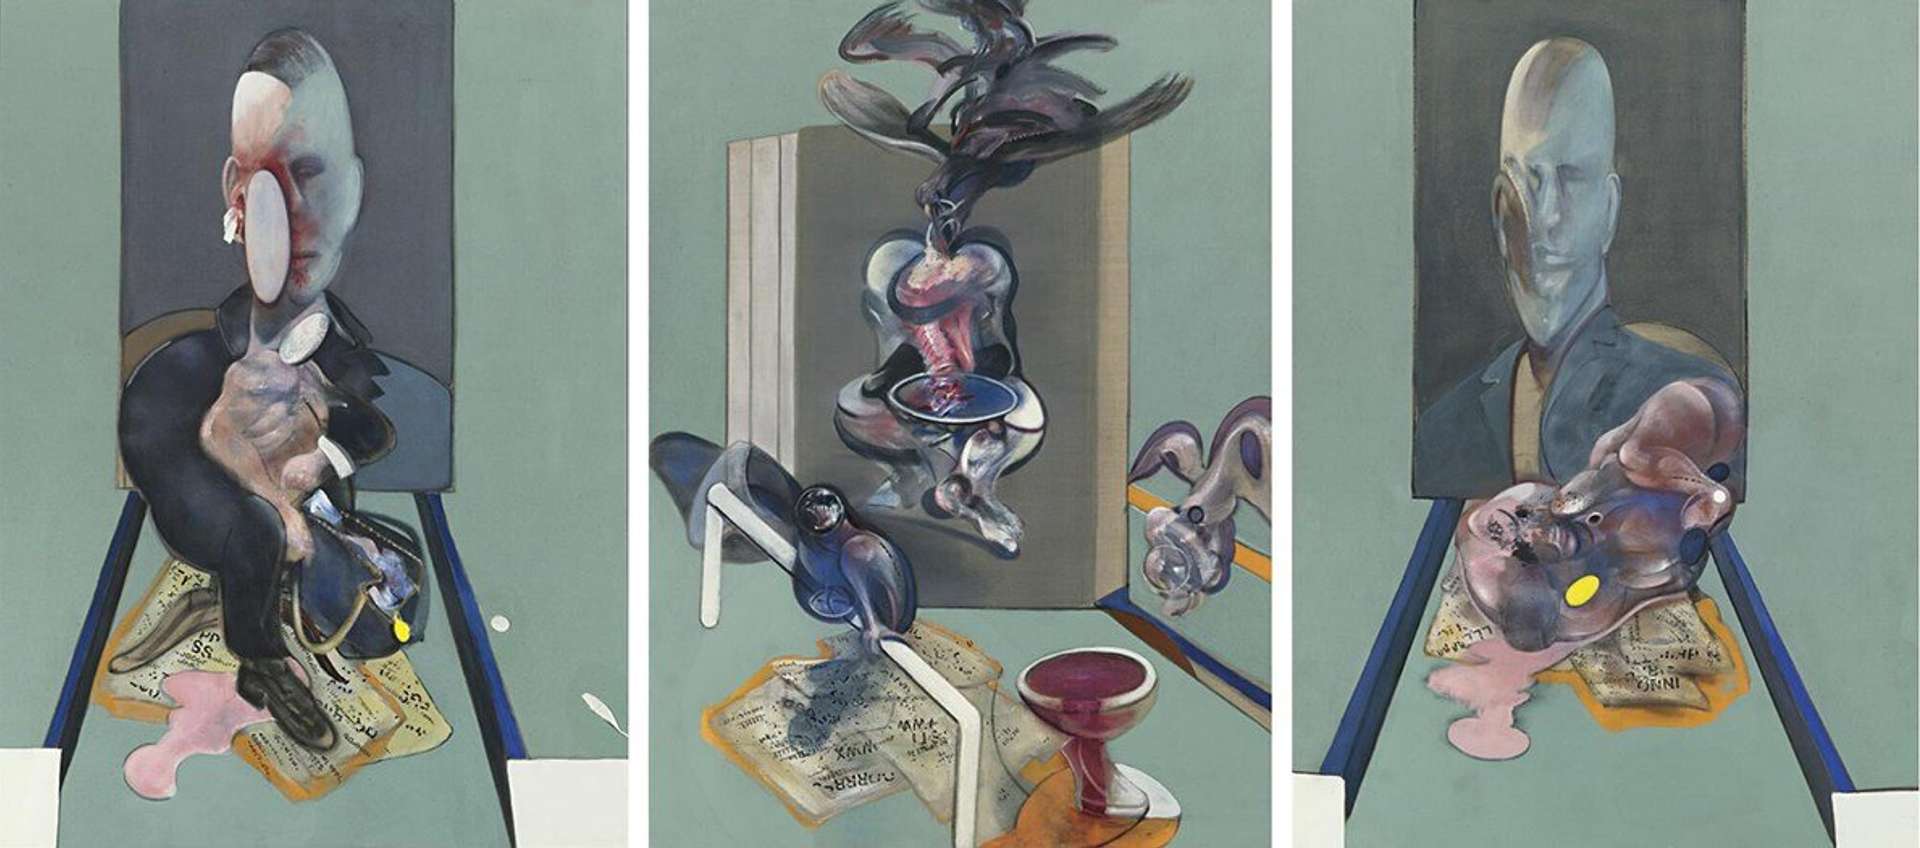 Triptych, 1976 by Francis Bacon